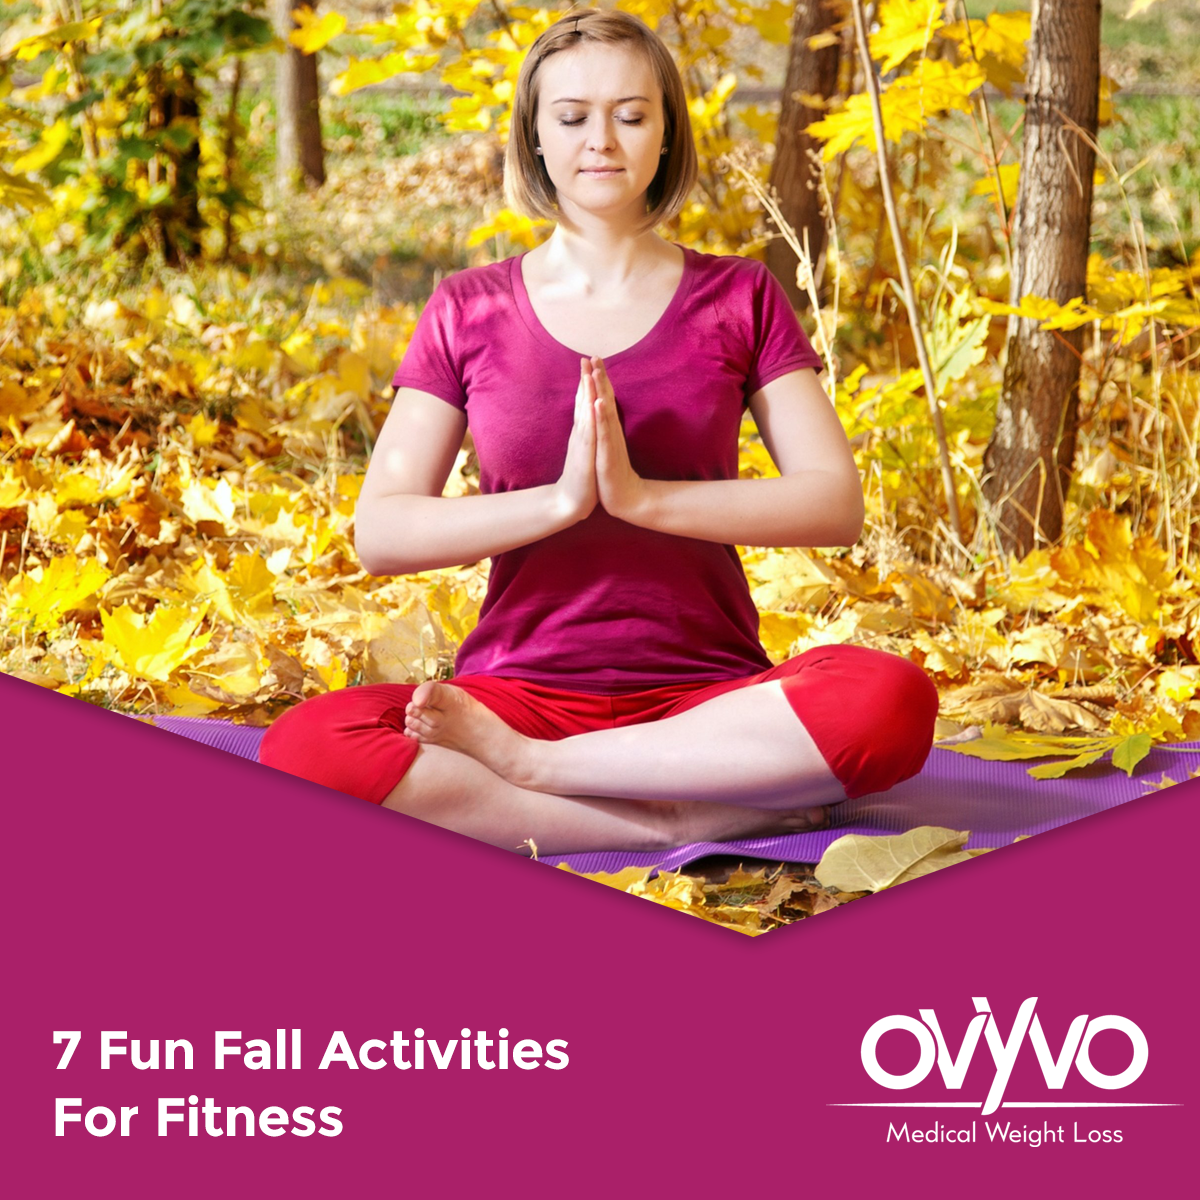 7 Fun Fall Activities for Fitness